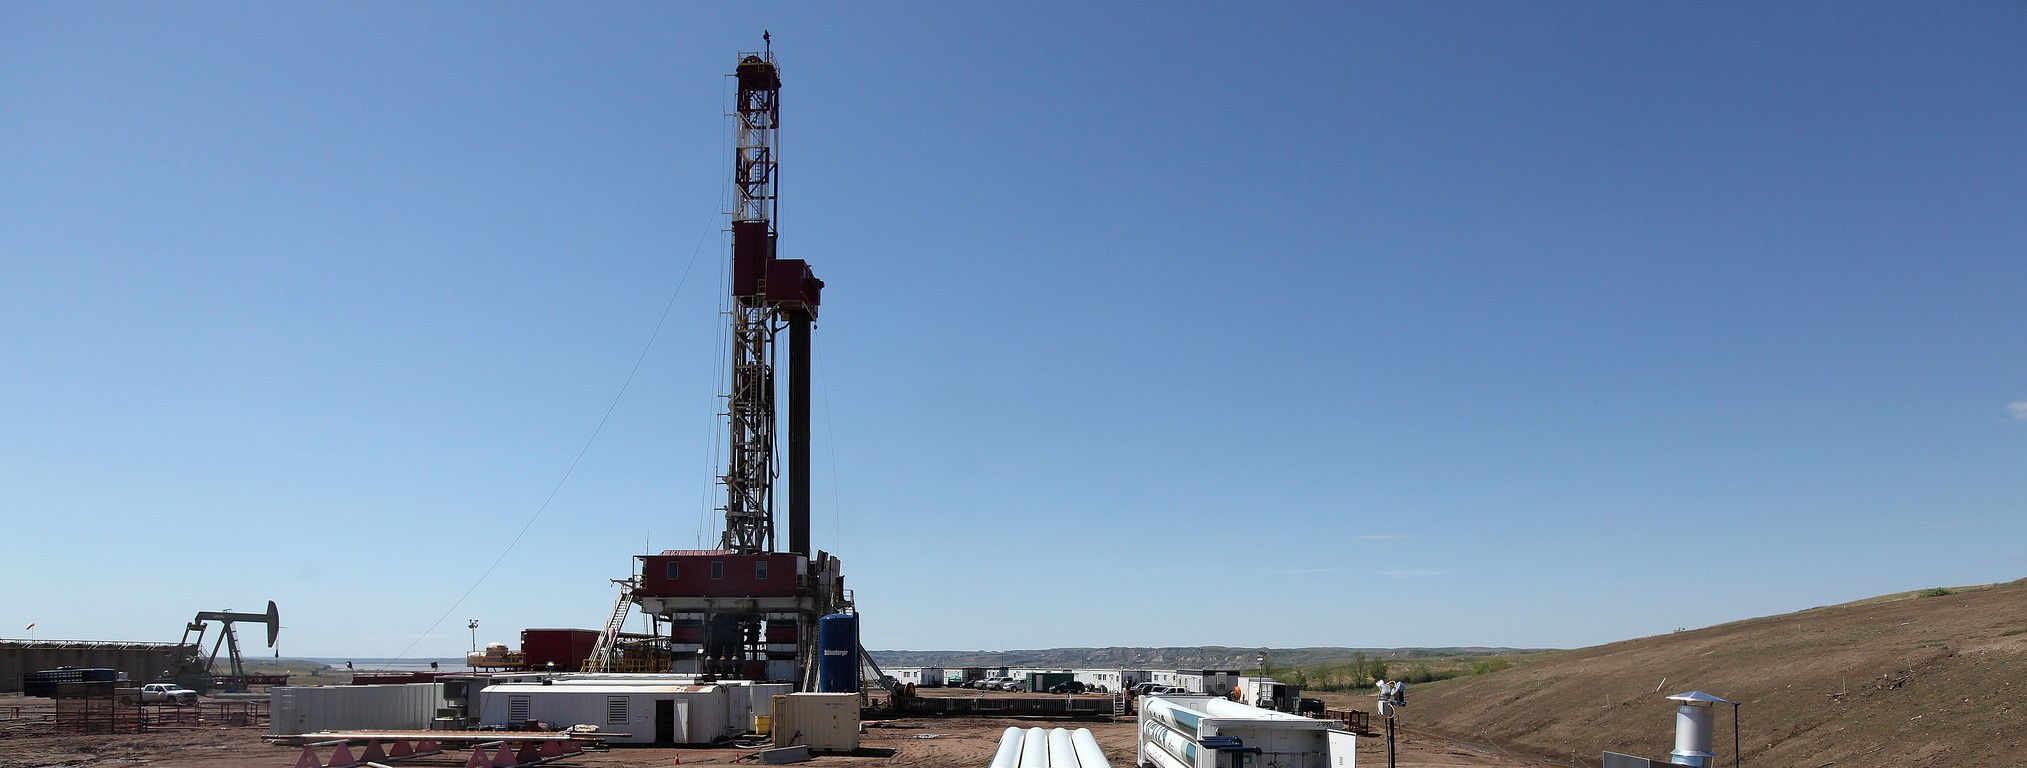 Oil’s boom and bust in North Dakota and the Bakken